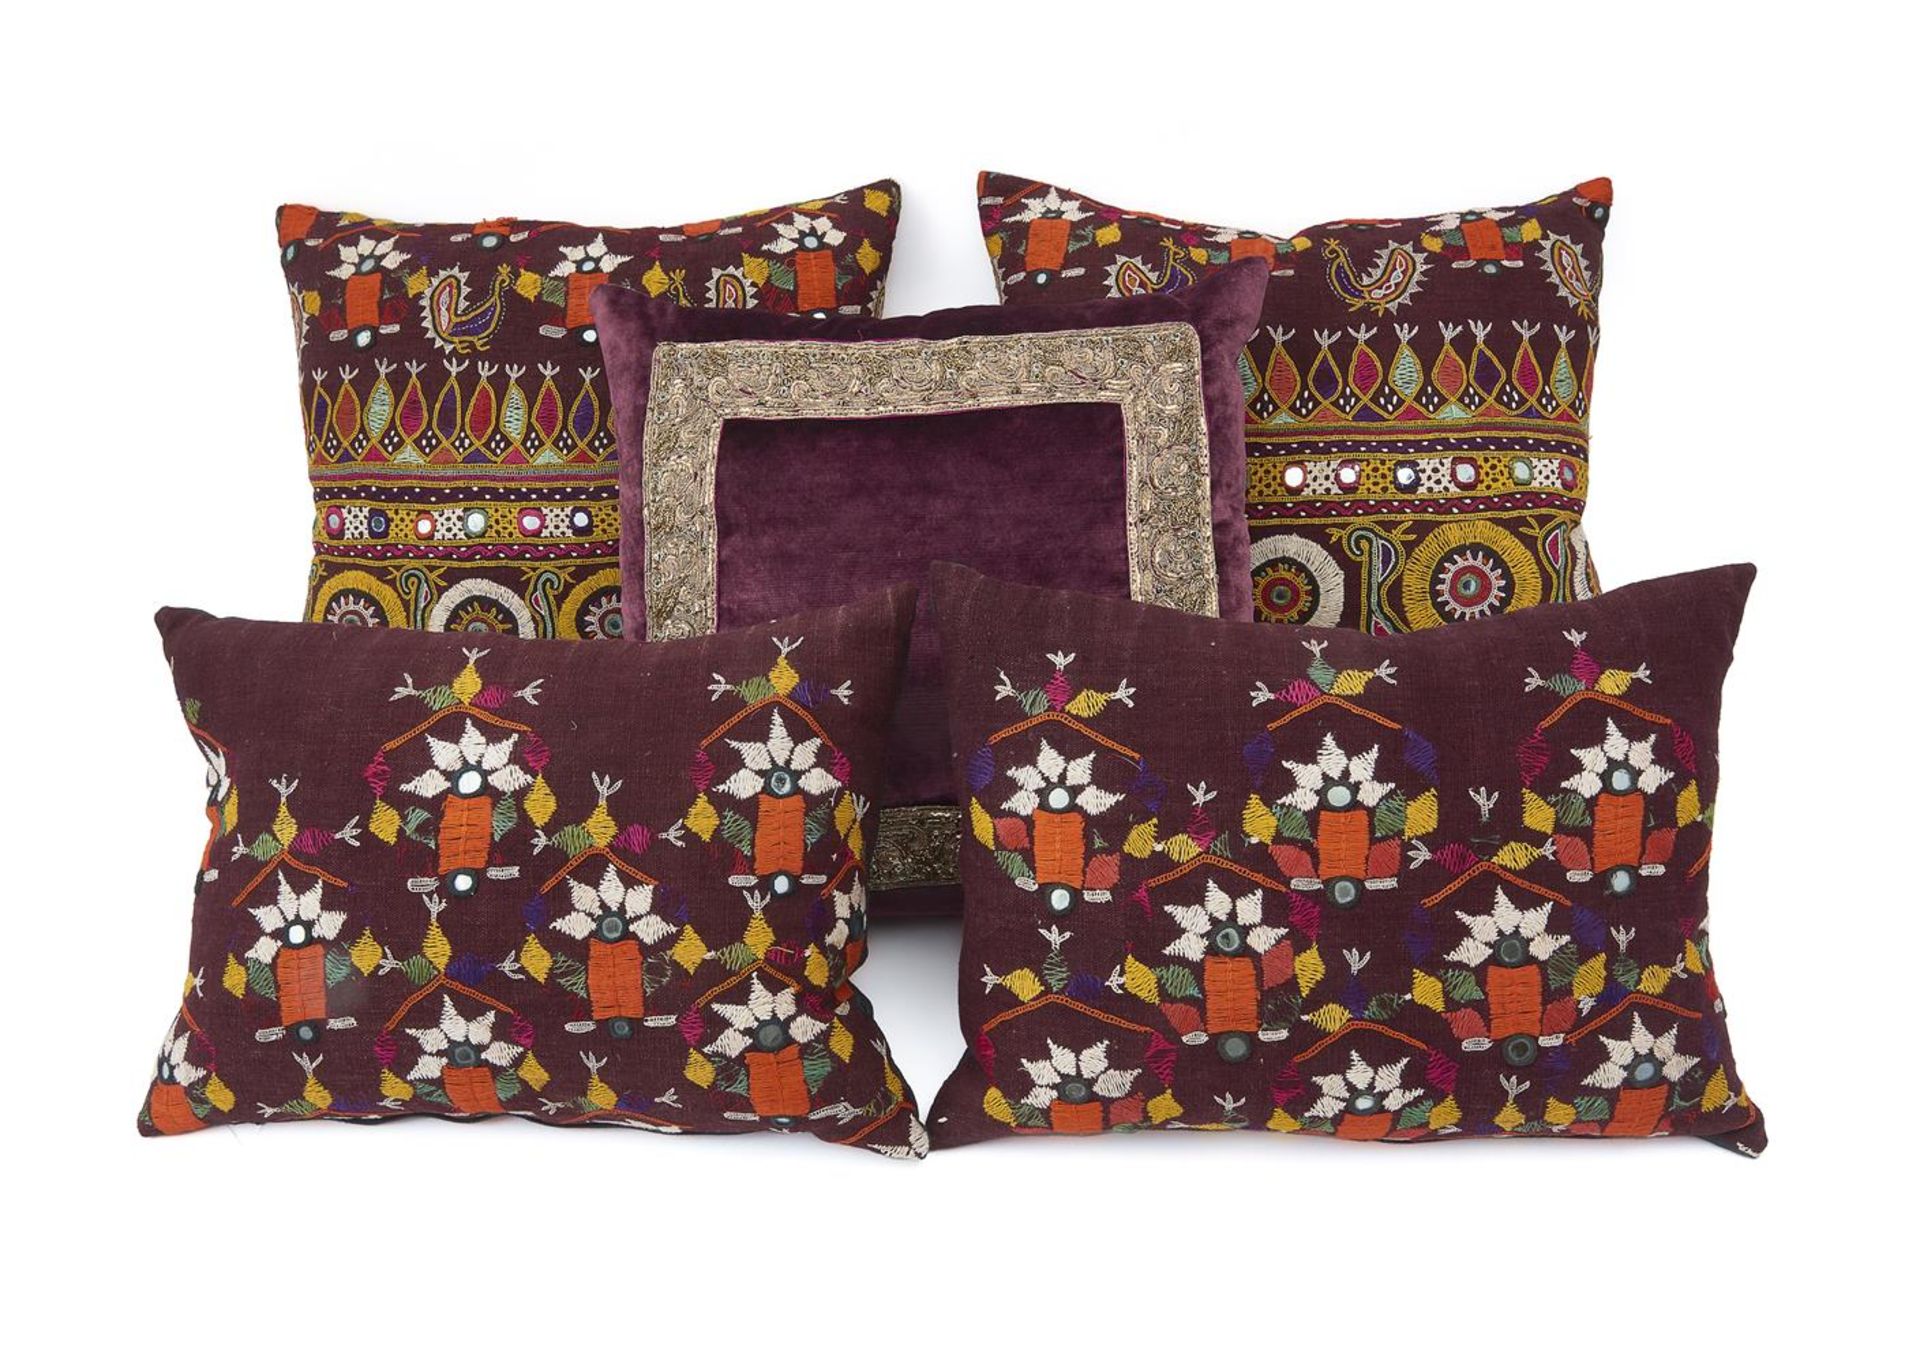 A GROUP OF FIVE CUSHIONS INCLUDING TWO PAIRS AND A SINGLE BY GUINEVERE